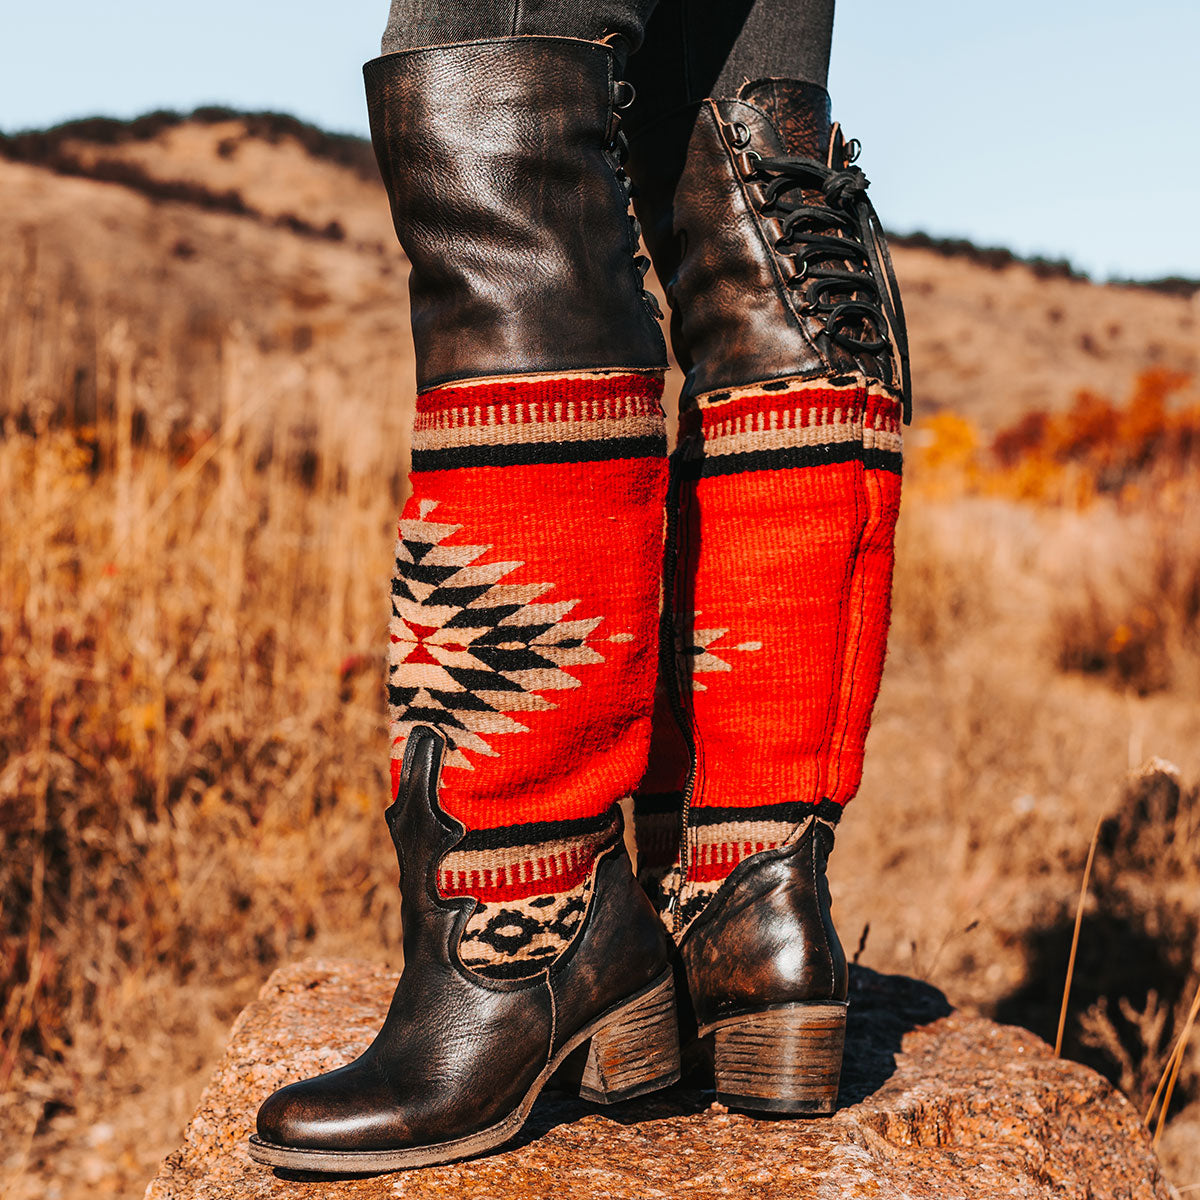 FREEBIRD women's Serape black leather knee high boot with woven detailing, leather tie lacing and an inside working brass zip closure